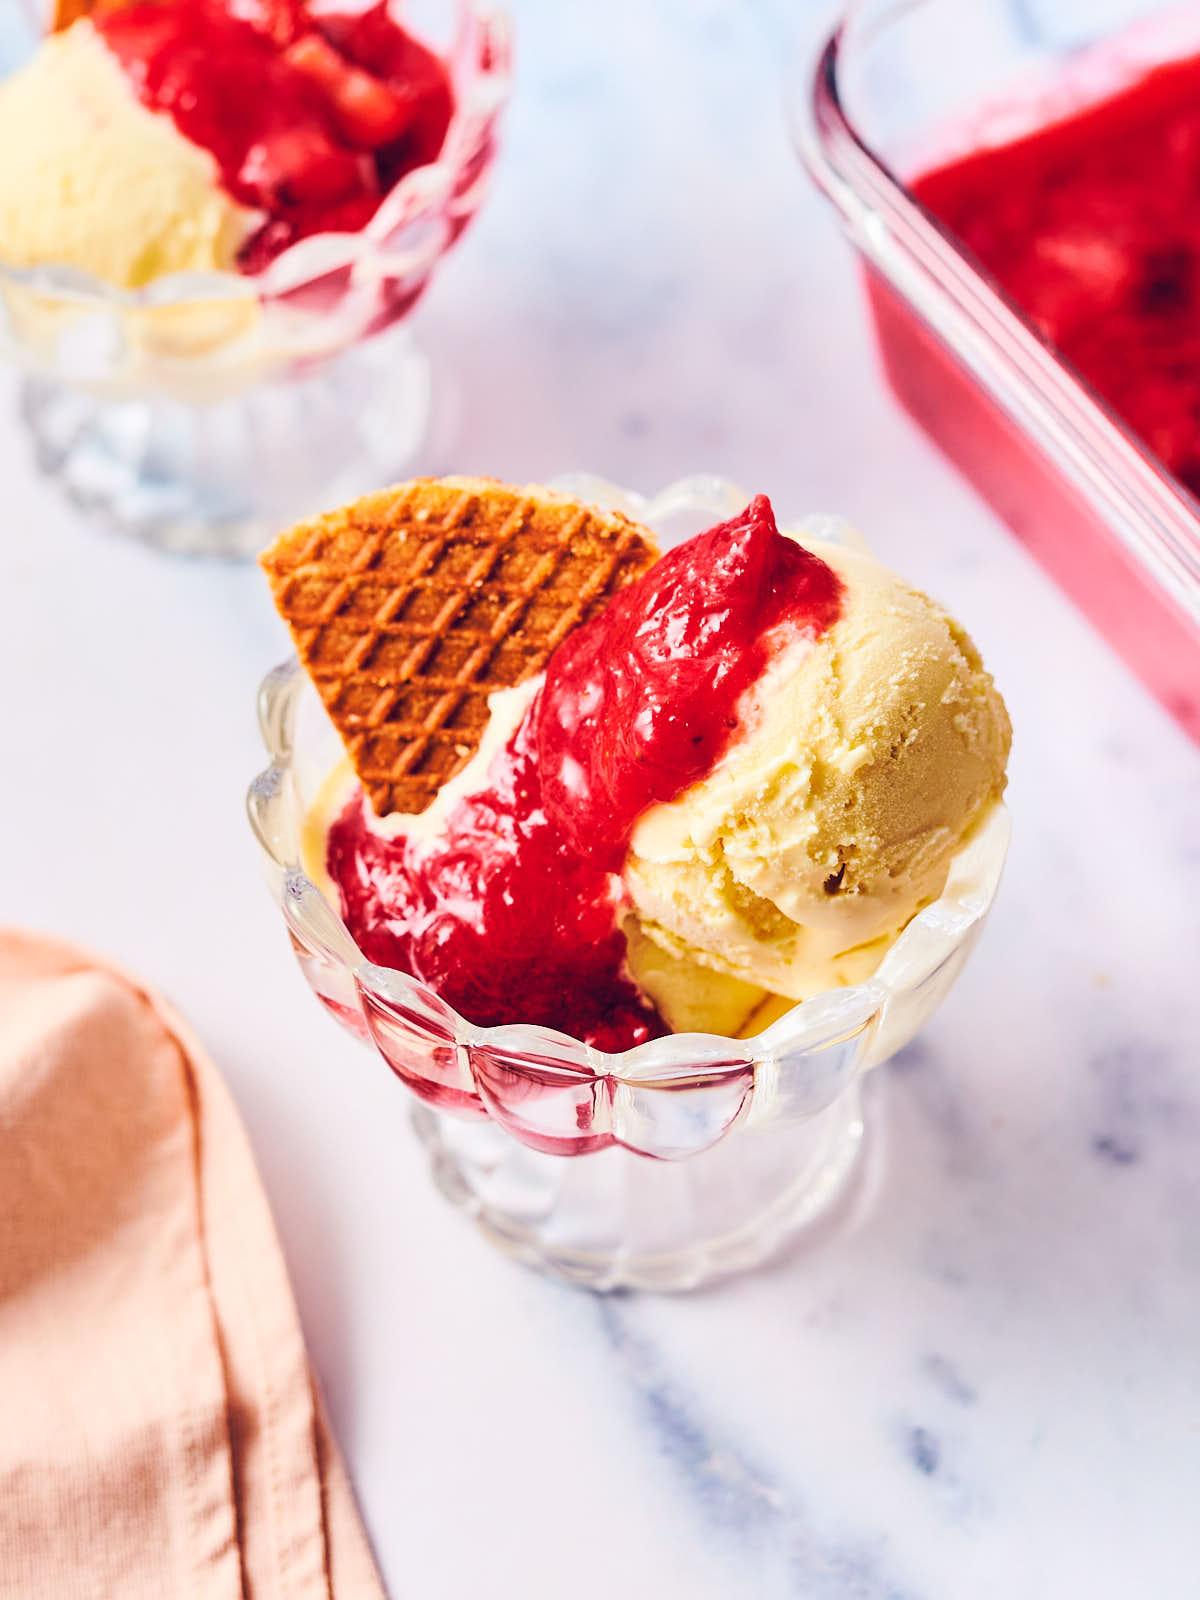 Ice cream topped with rhubarb compote and a stroopwafel.